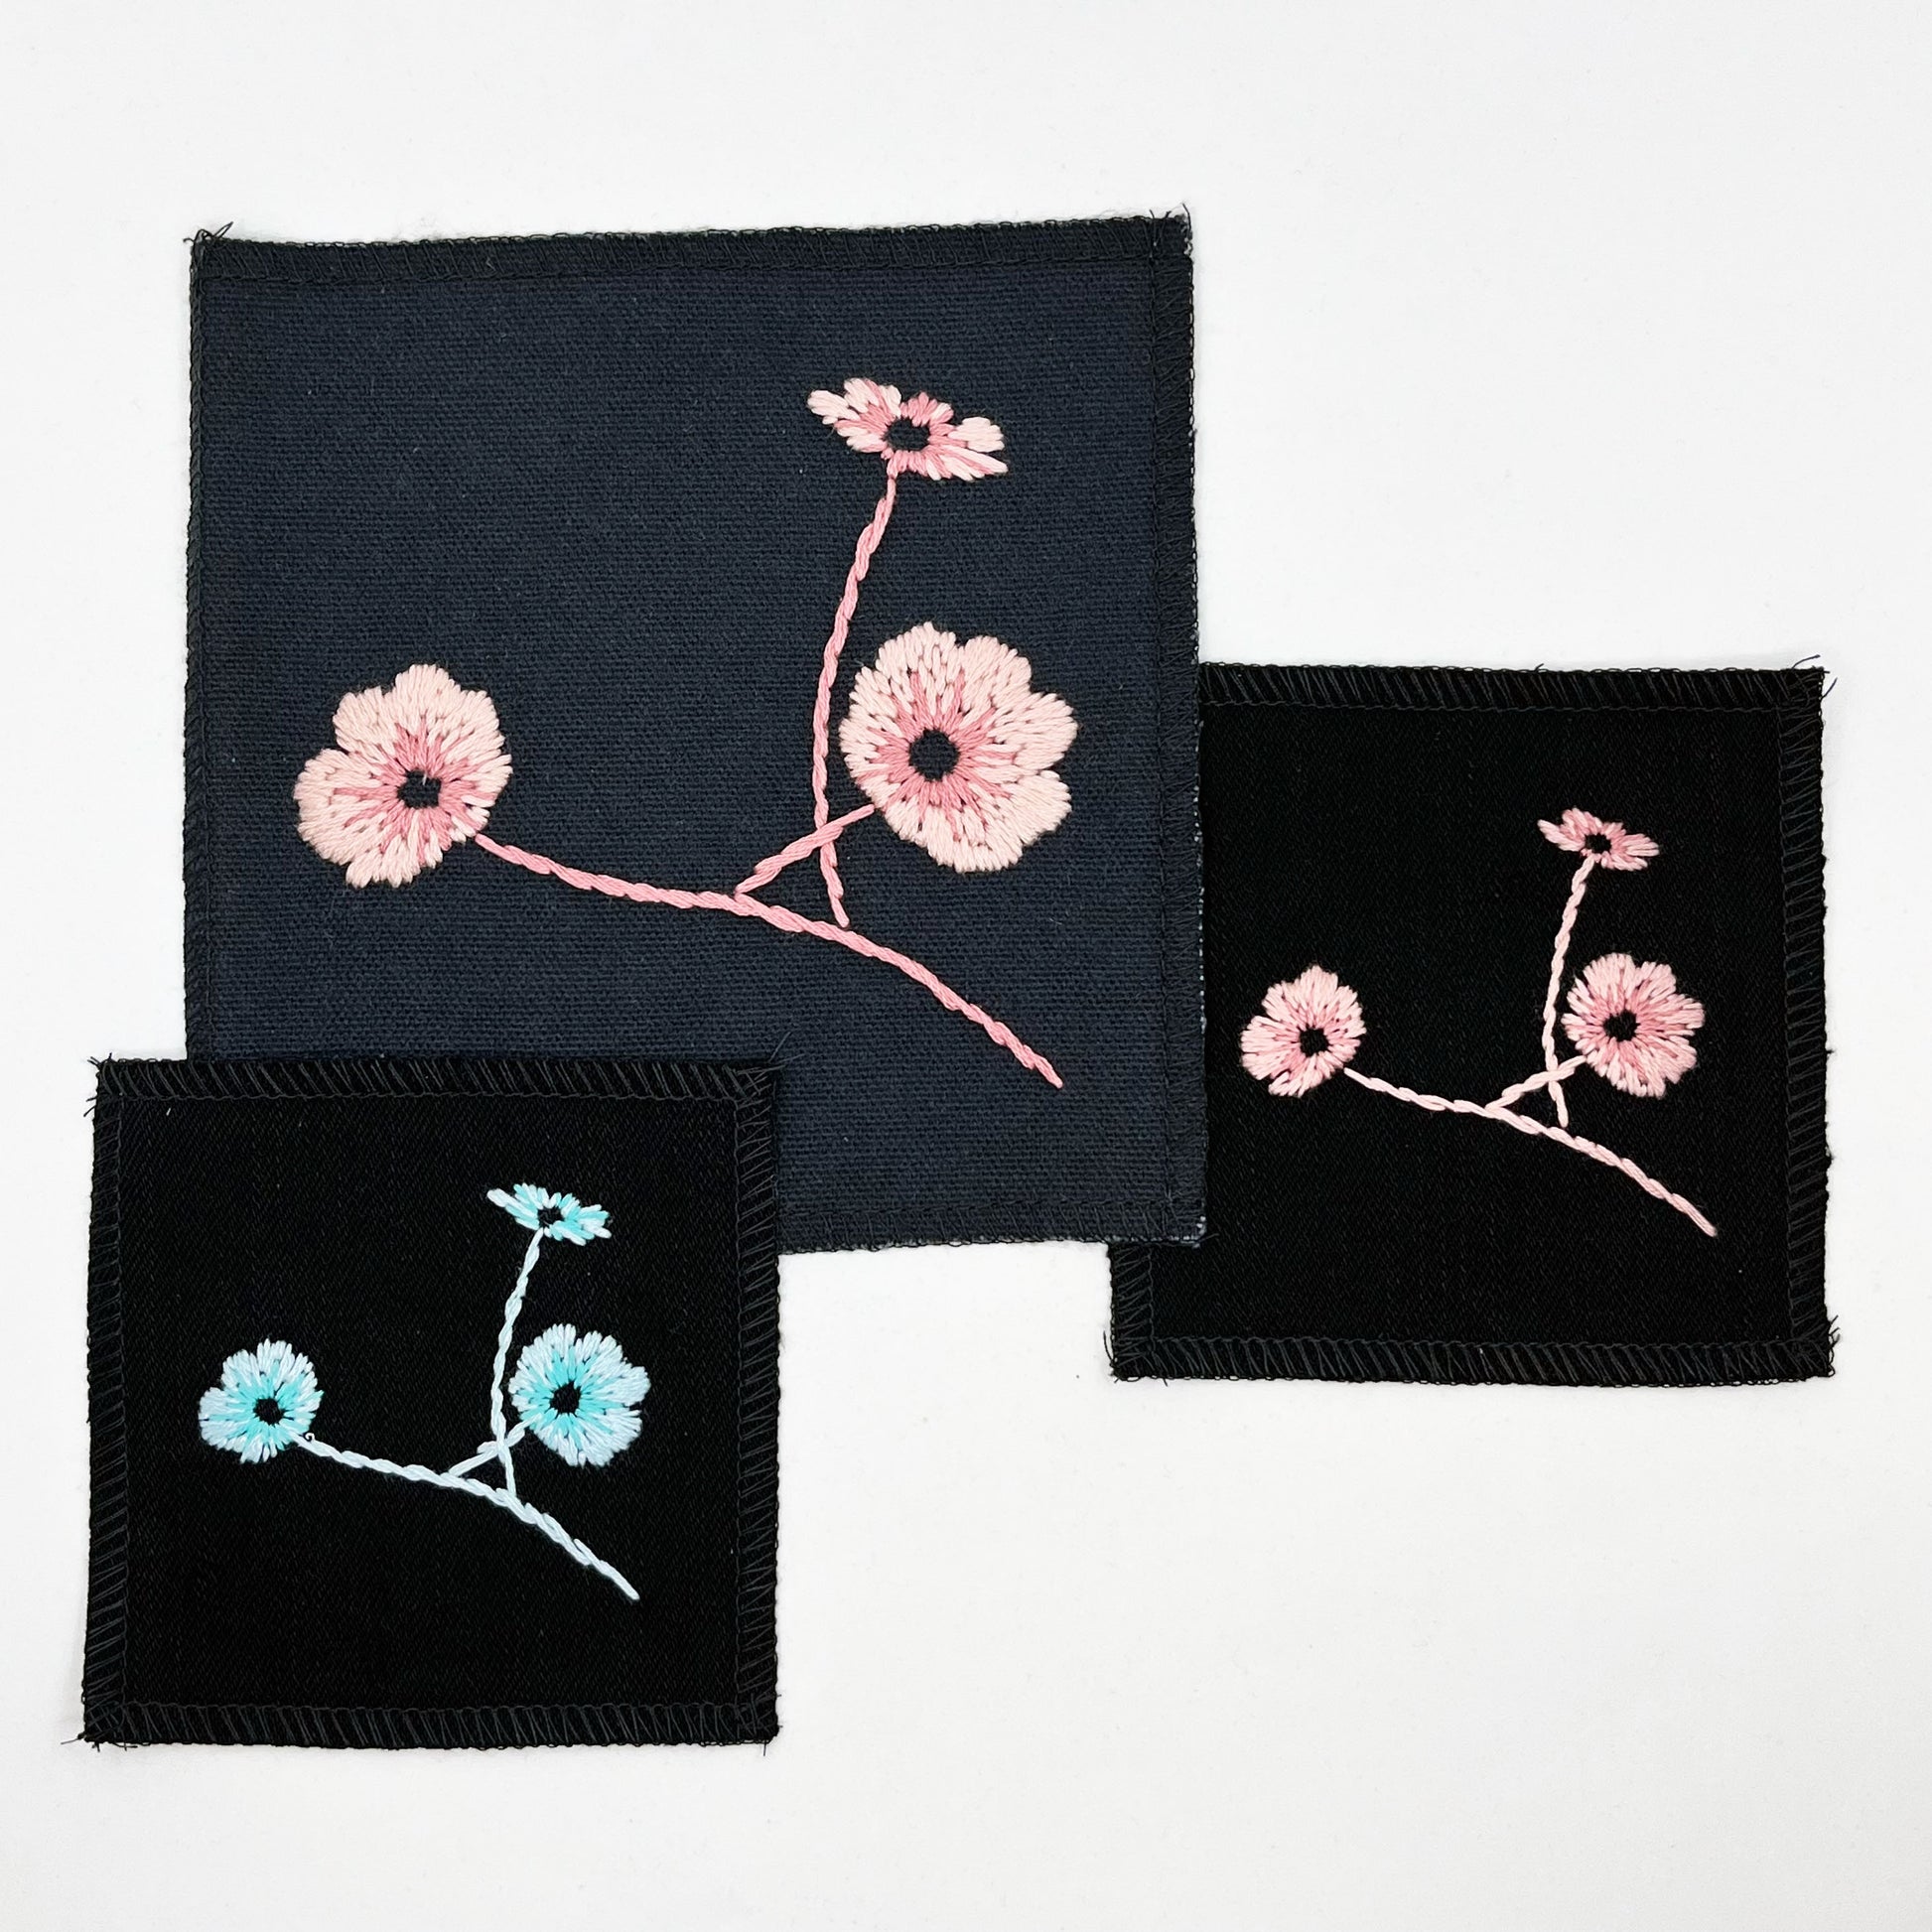 a group of square patches in black fabric, hand embroidered with three poppies on stems, some in shades of pink, some in shades of blue